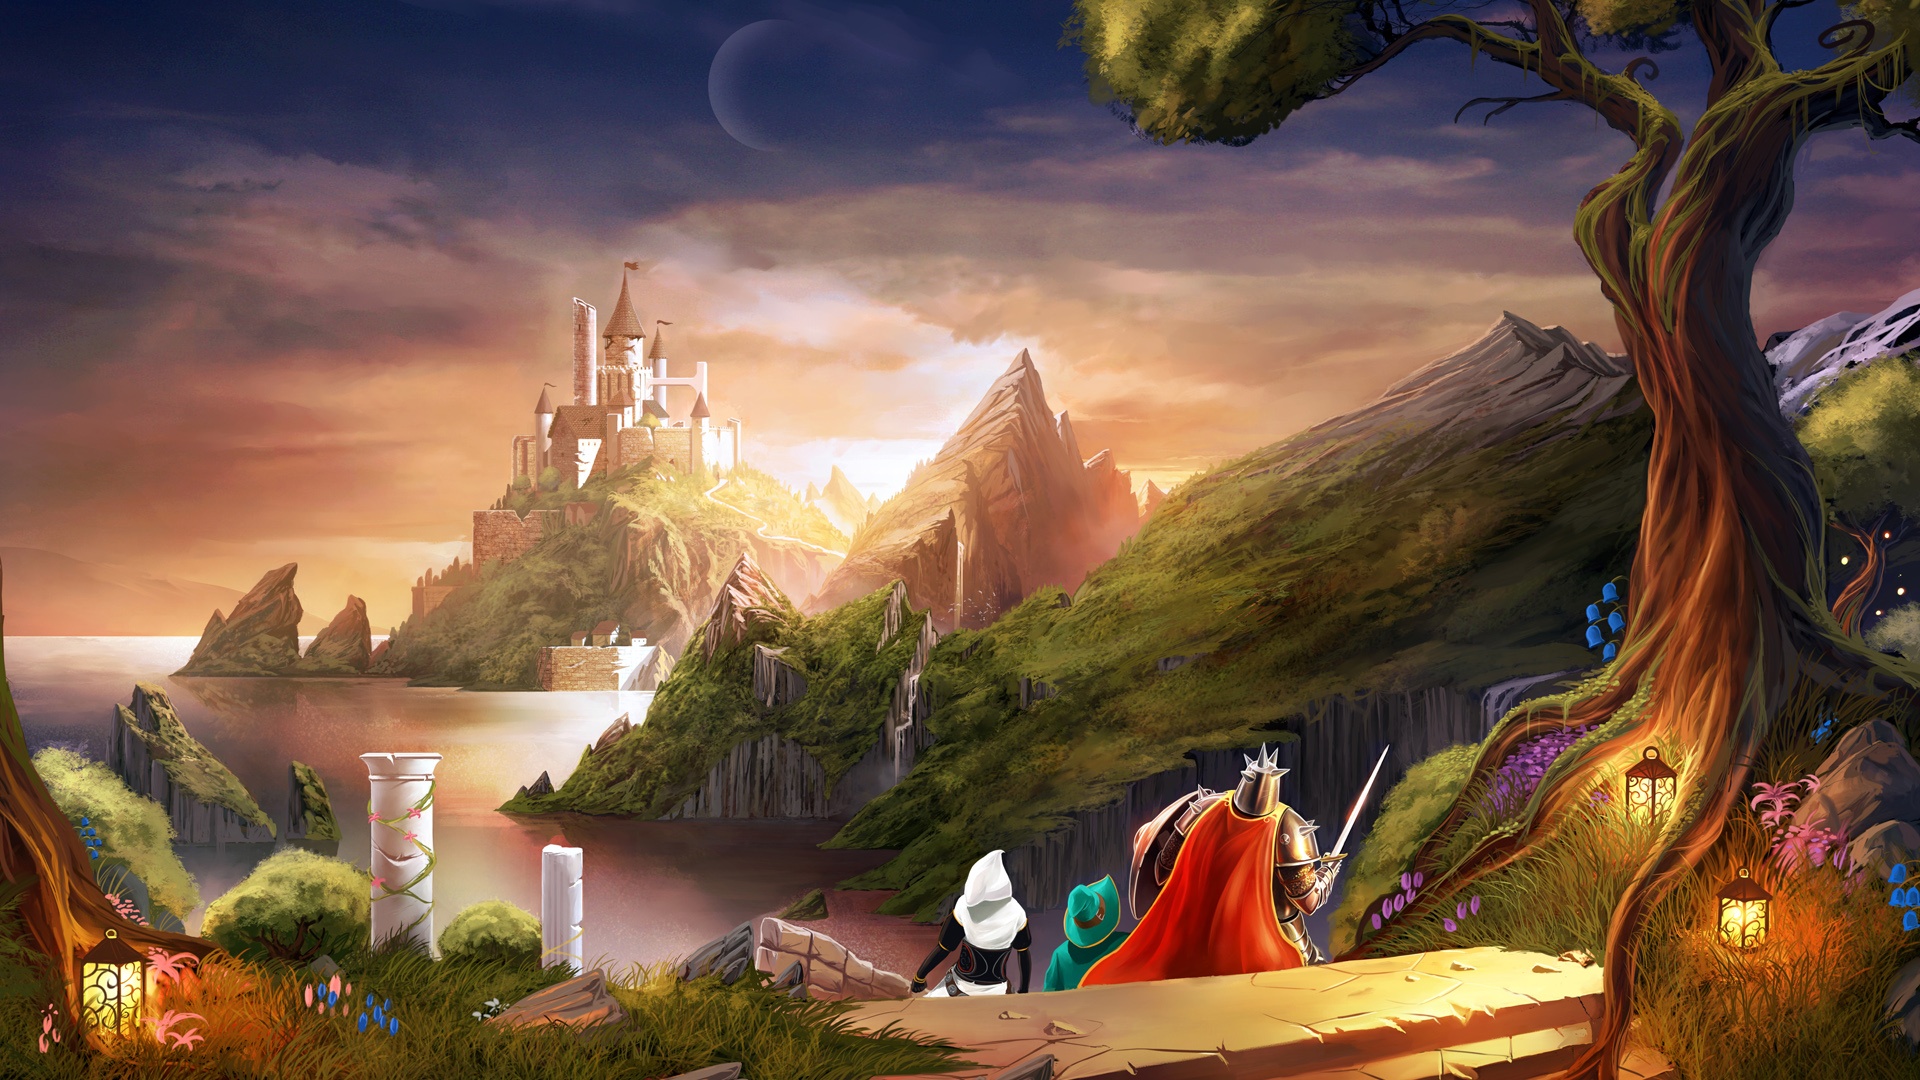 Trine 2 Heading for Castle Wallpapers | HD Wallpapers